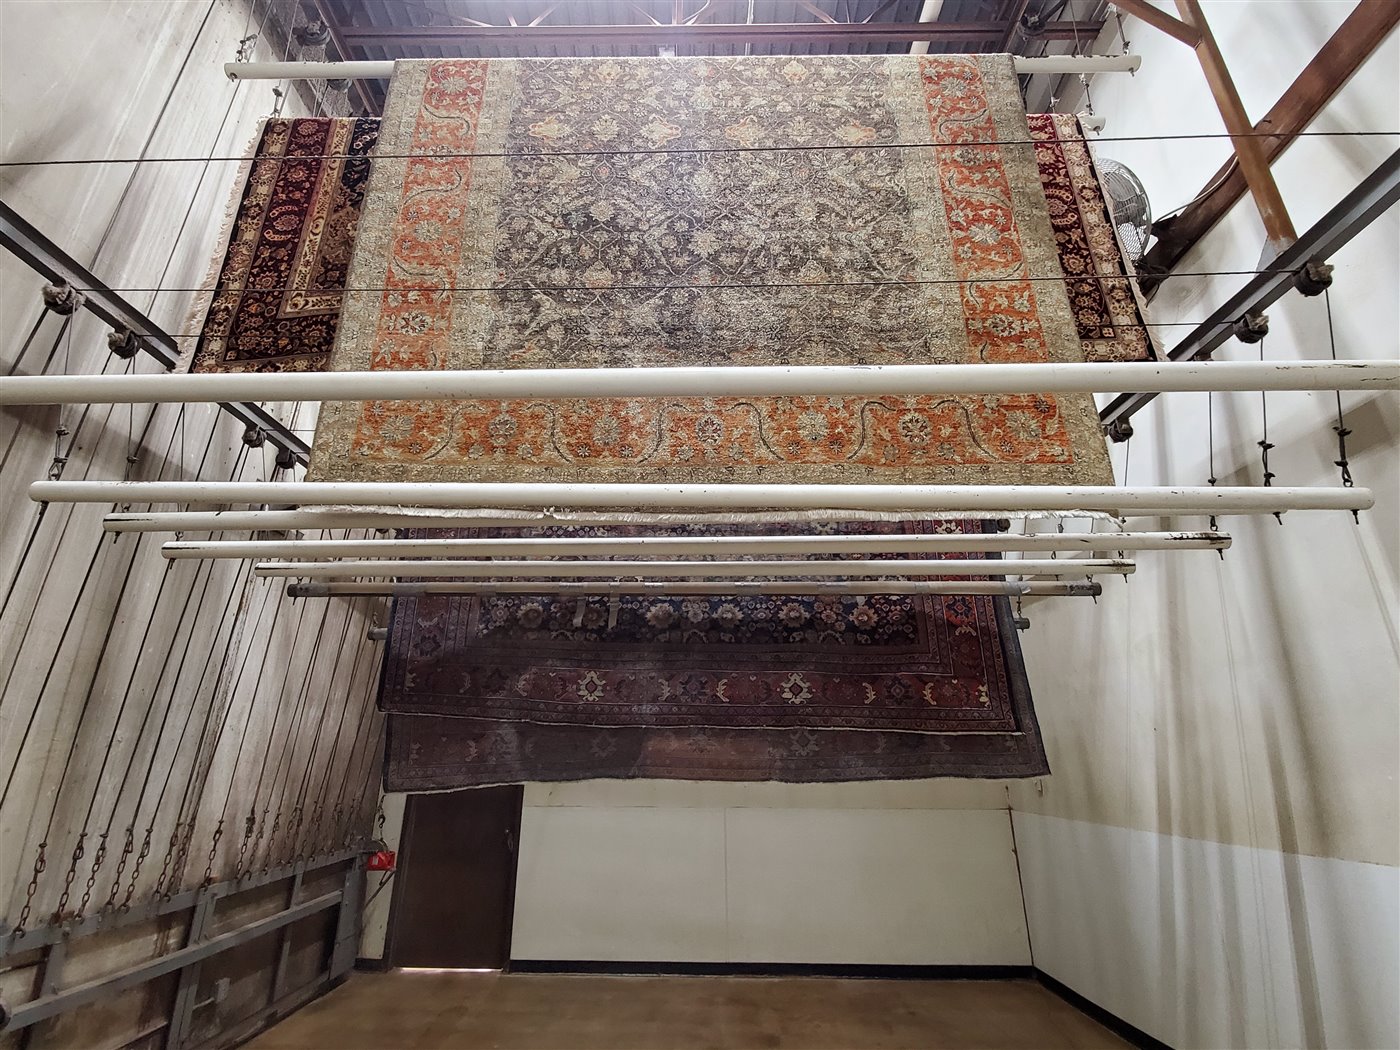 The rug is dried with a special drying method.